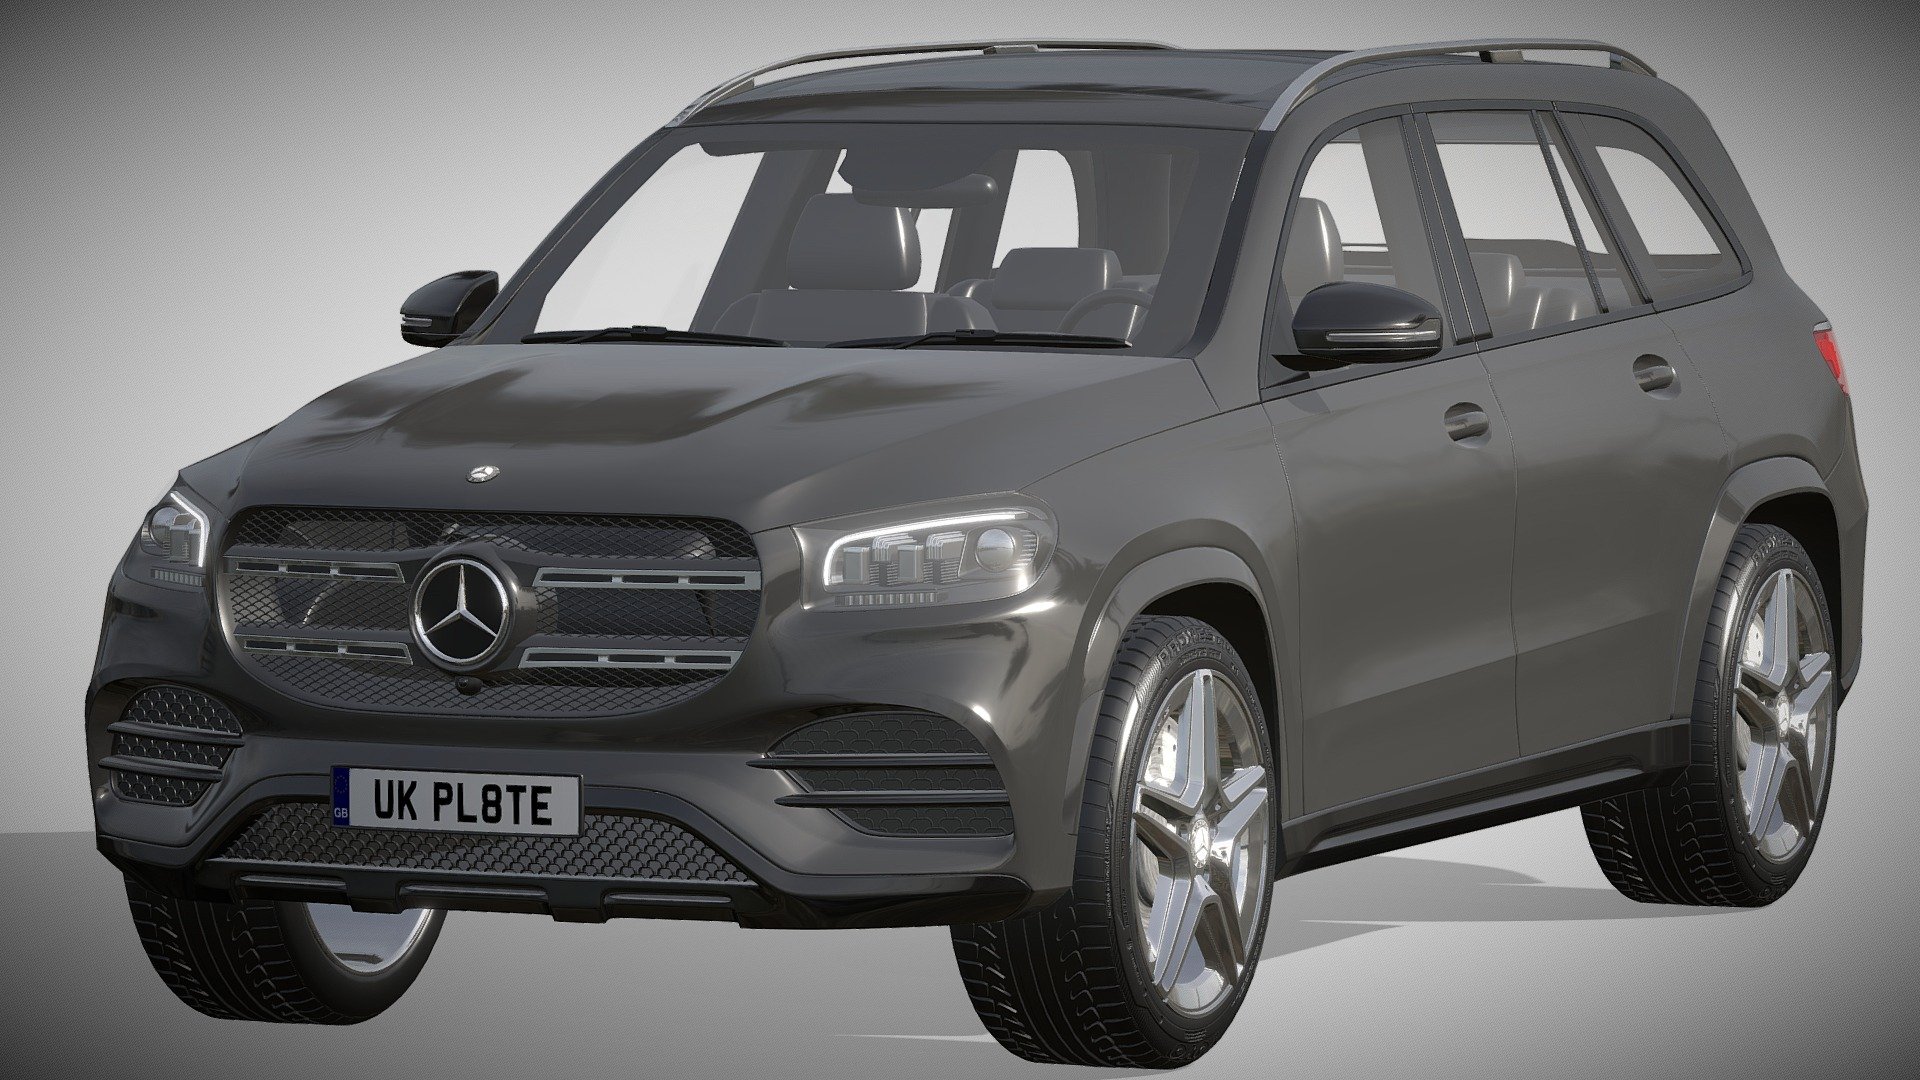 Mercedes-Benz GLS

https://www.mbusa.com/en/vehicles/class/gls/suv

Clean geometry Light weight model, yet completely detailed for HI-Res renders. Use for movies, Advertisements or games

Corona render and materials

All textures include in *.rar files

Lighting setup is not included in the file! - Mercedes-Benz GLS - Buy Royalty Free 3D model by zifir3d 3d model